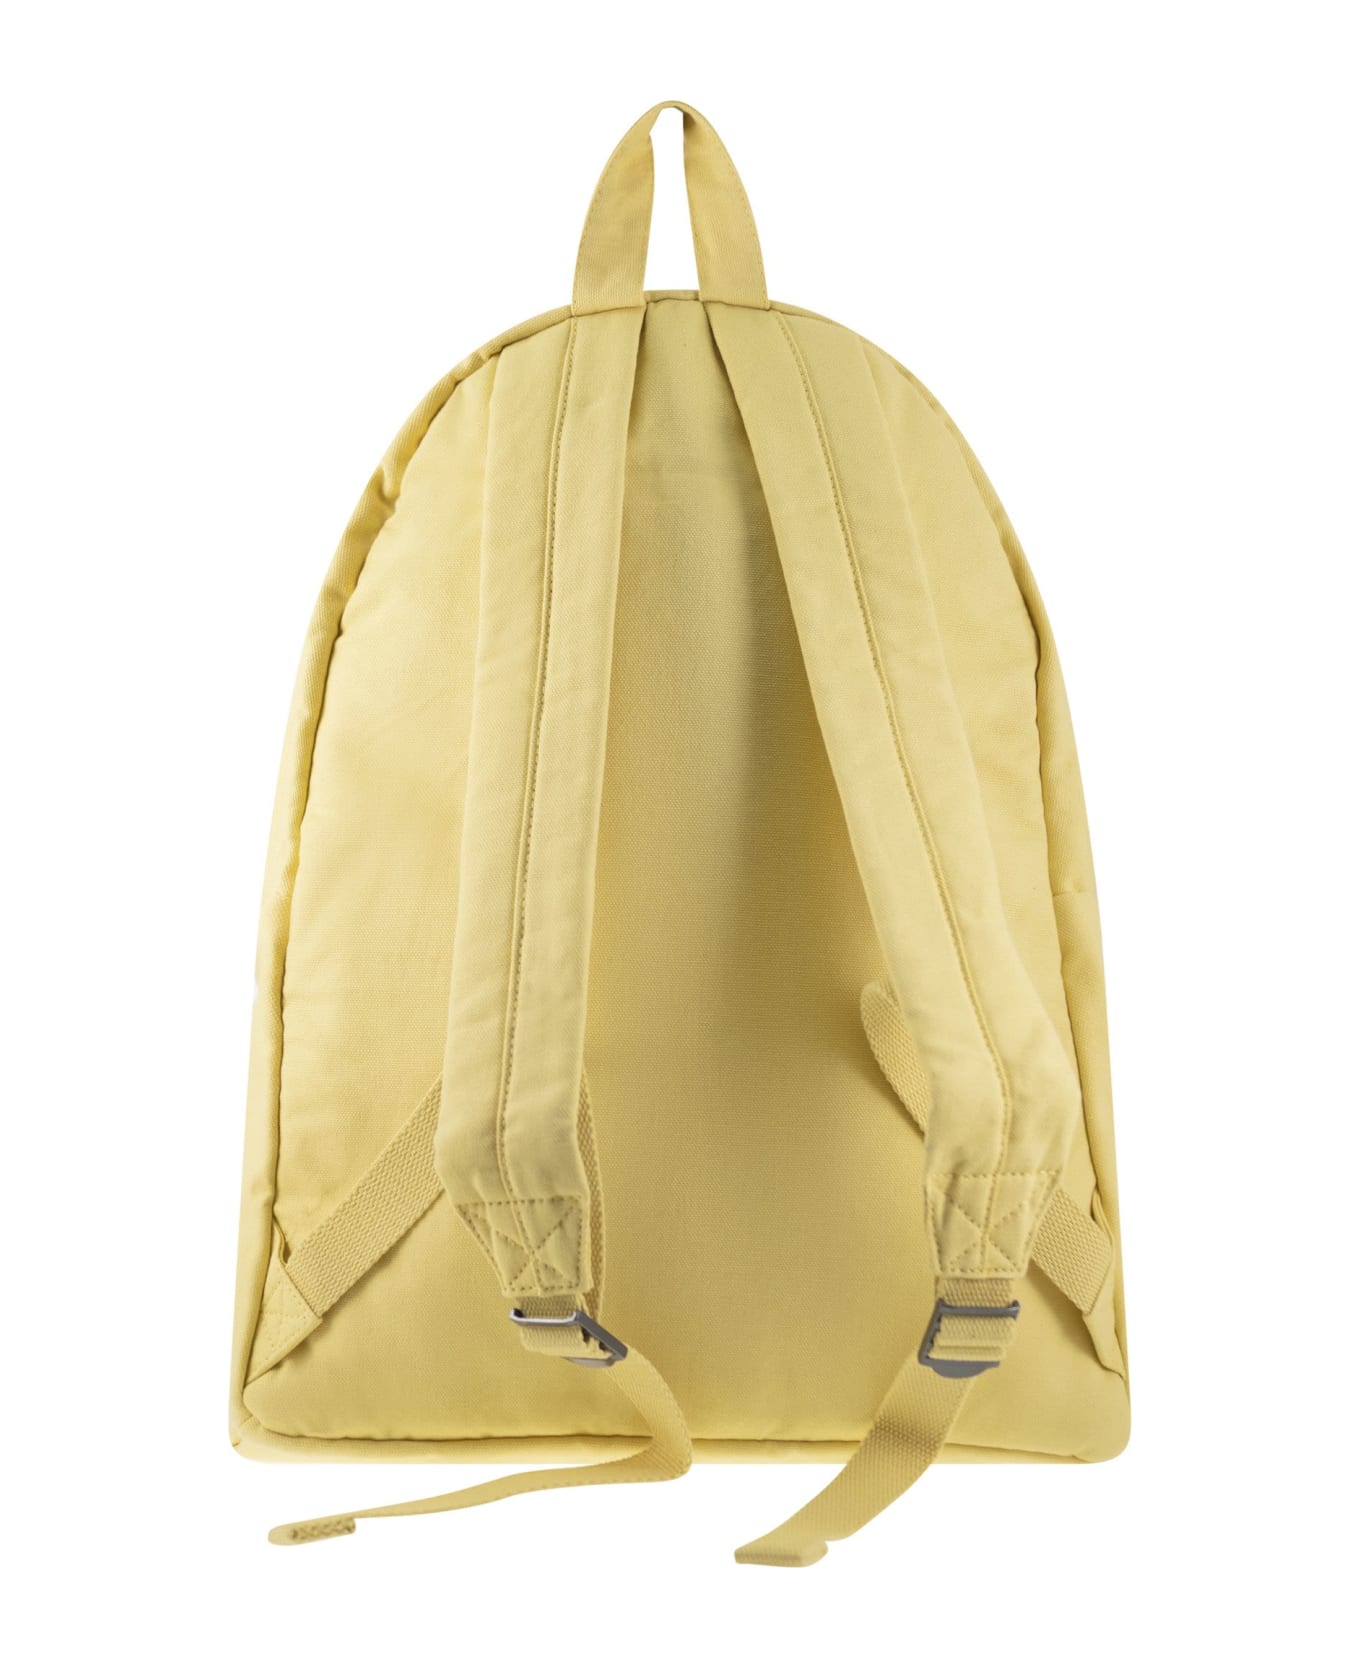 Polo Ralph Lauren Canvas Backpack - Yellow バックパック